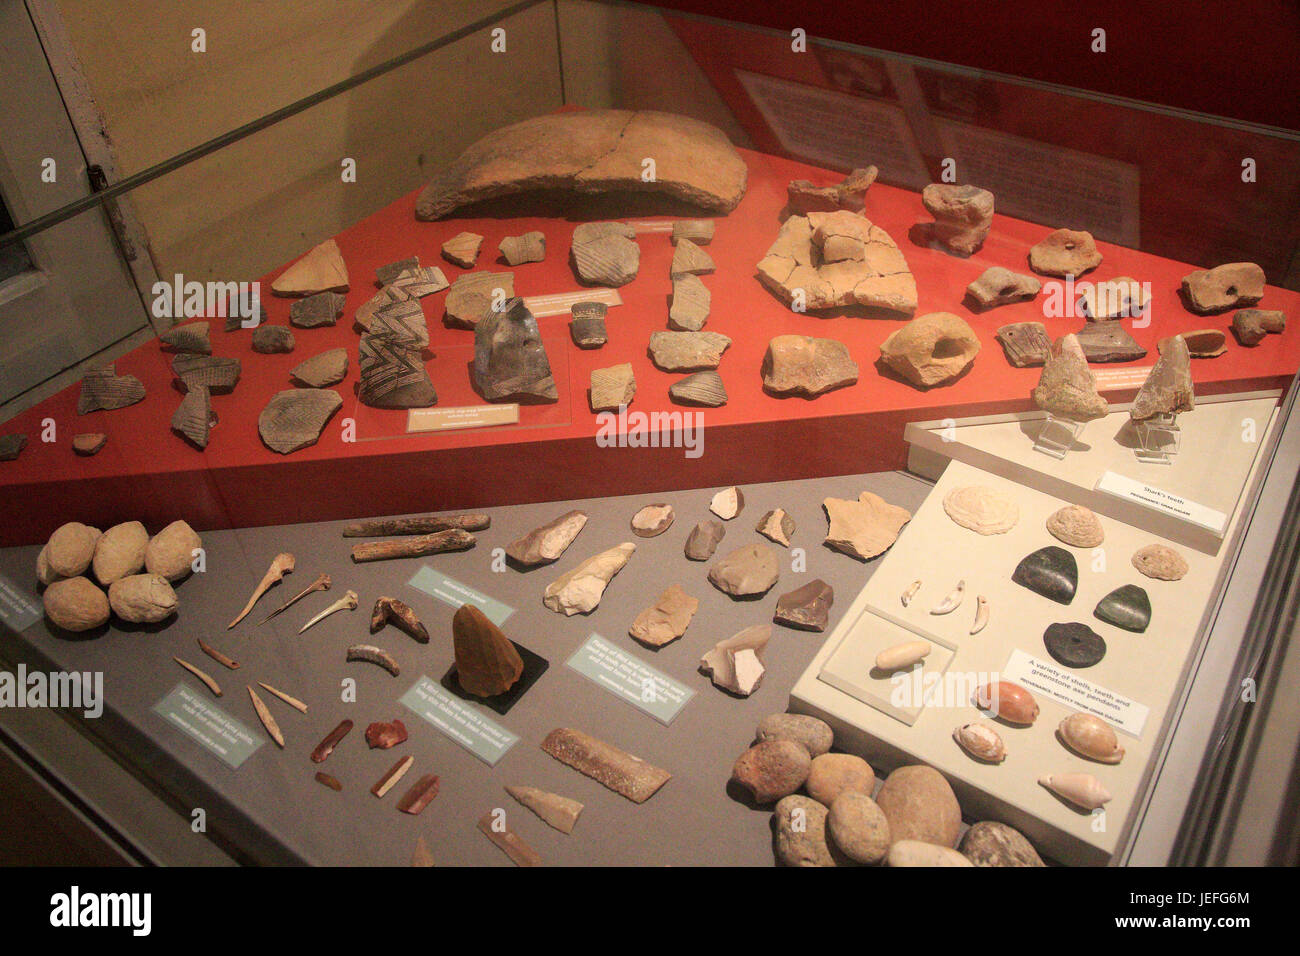 Pottery and tool display of neolithic finds, National Museum of Archaeology, Valletta, Malta Stock Photo